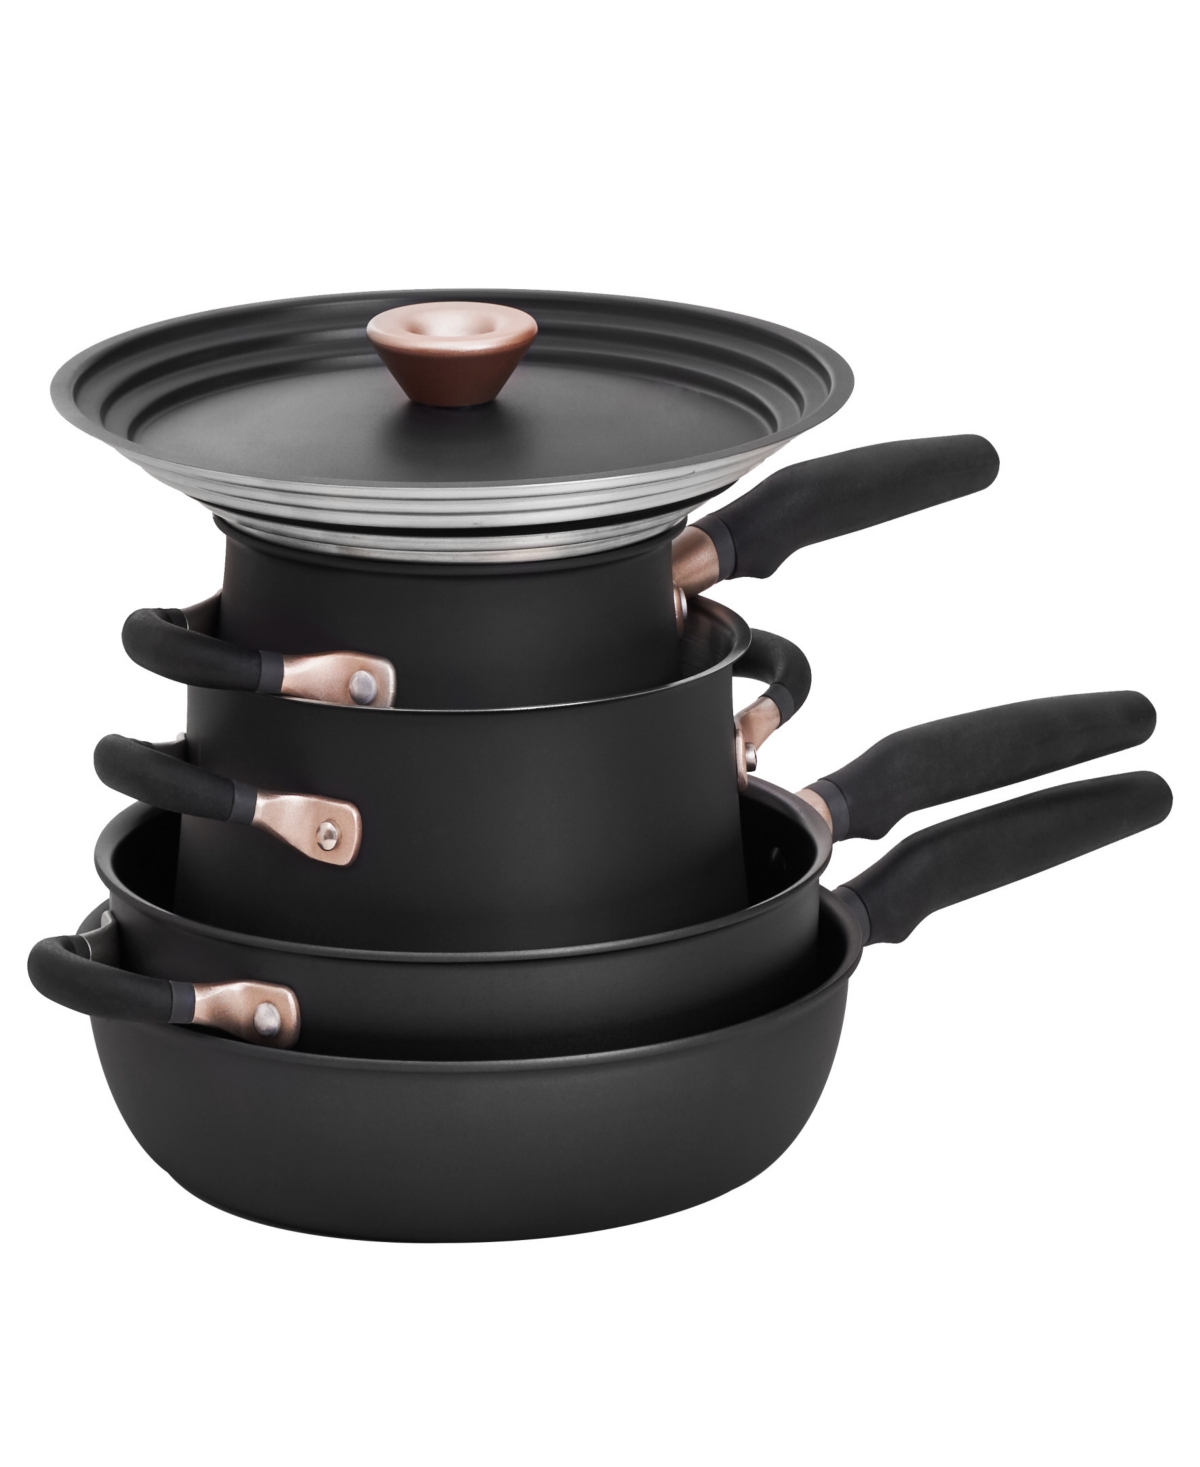 Meyer Accent Series Hard Anodized Alum And Stainless Steel 6-piece Cookware Essentials Set In Matte Black With Gold Accent